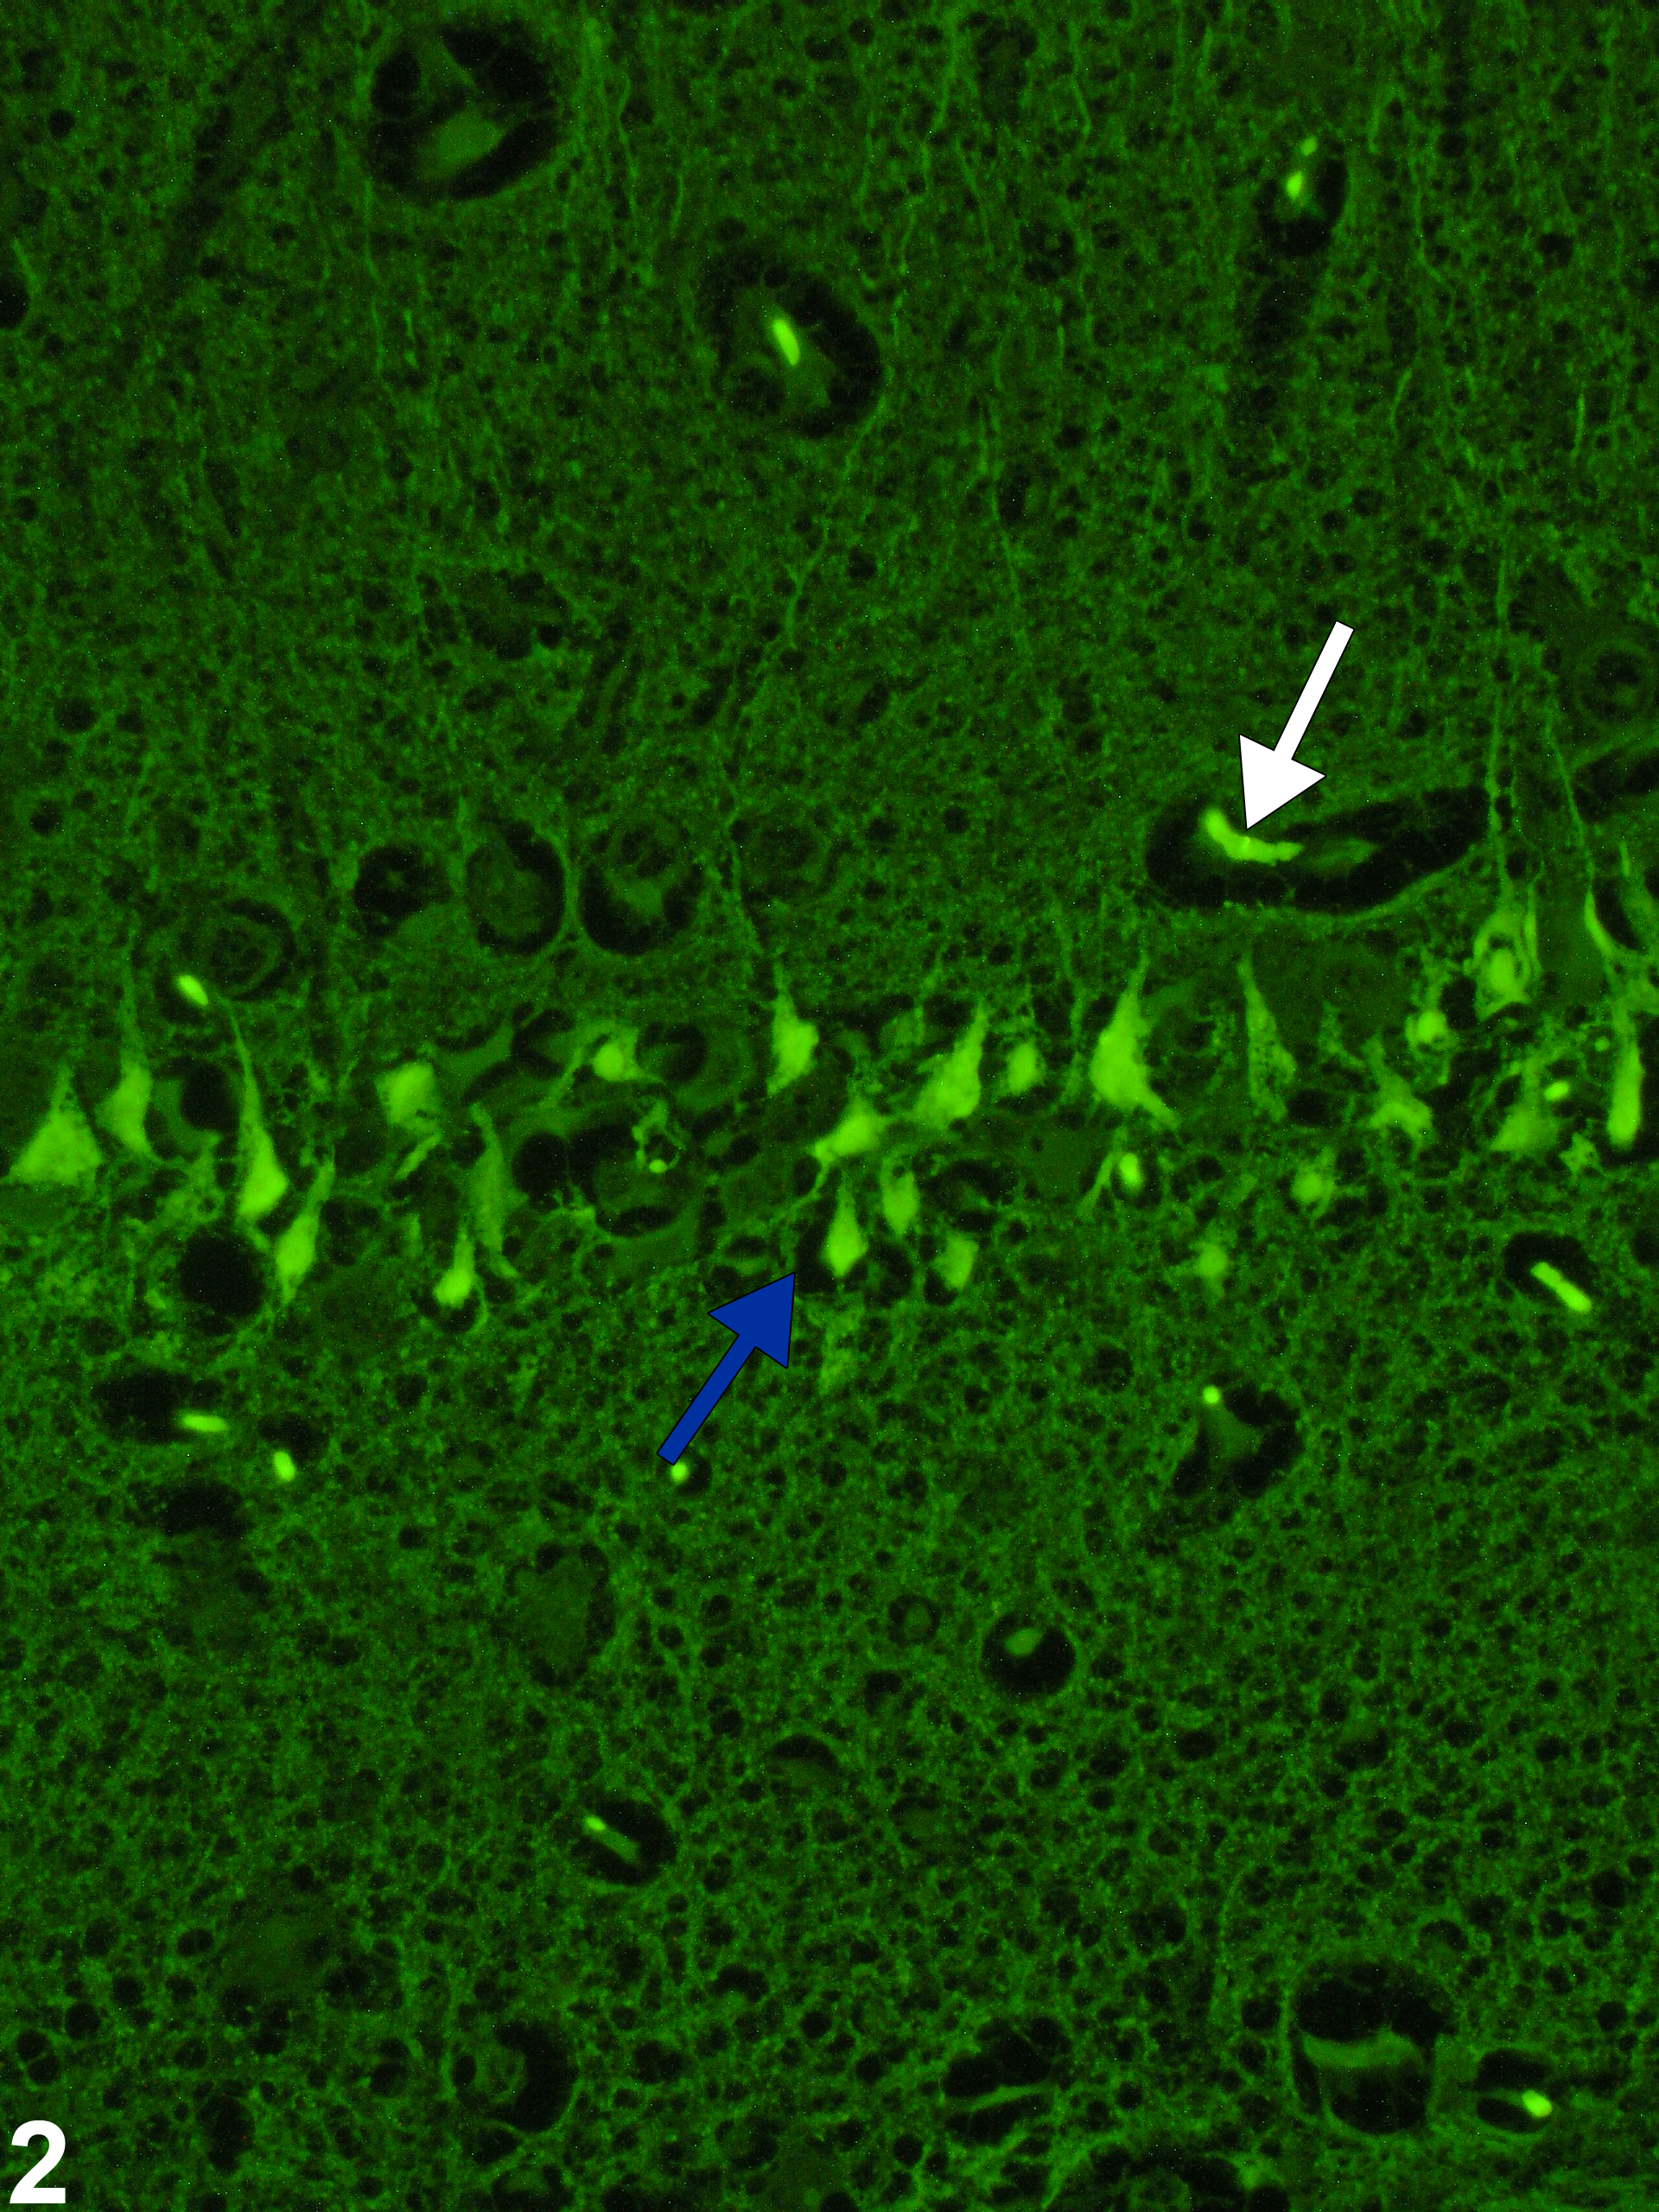 Image of necrosis in the brain from a Wistar rat in a subchronic study